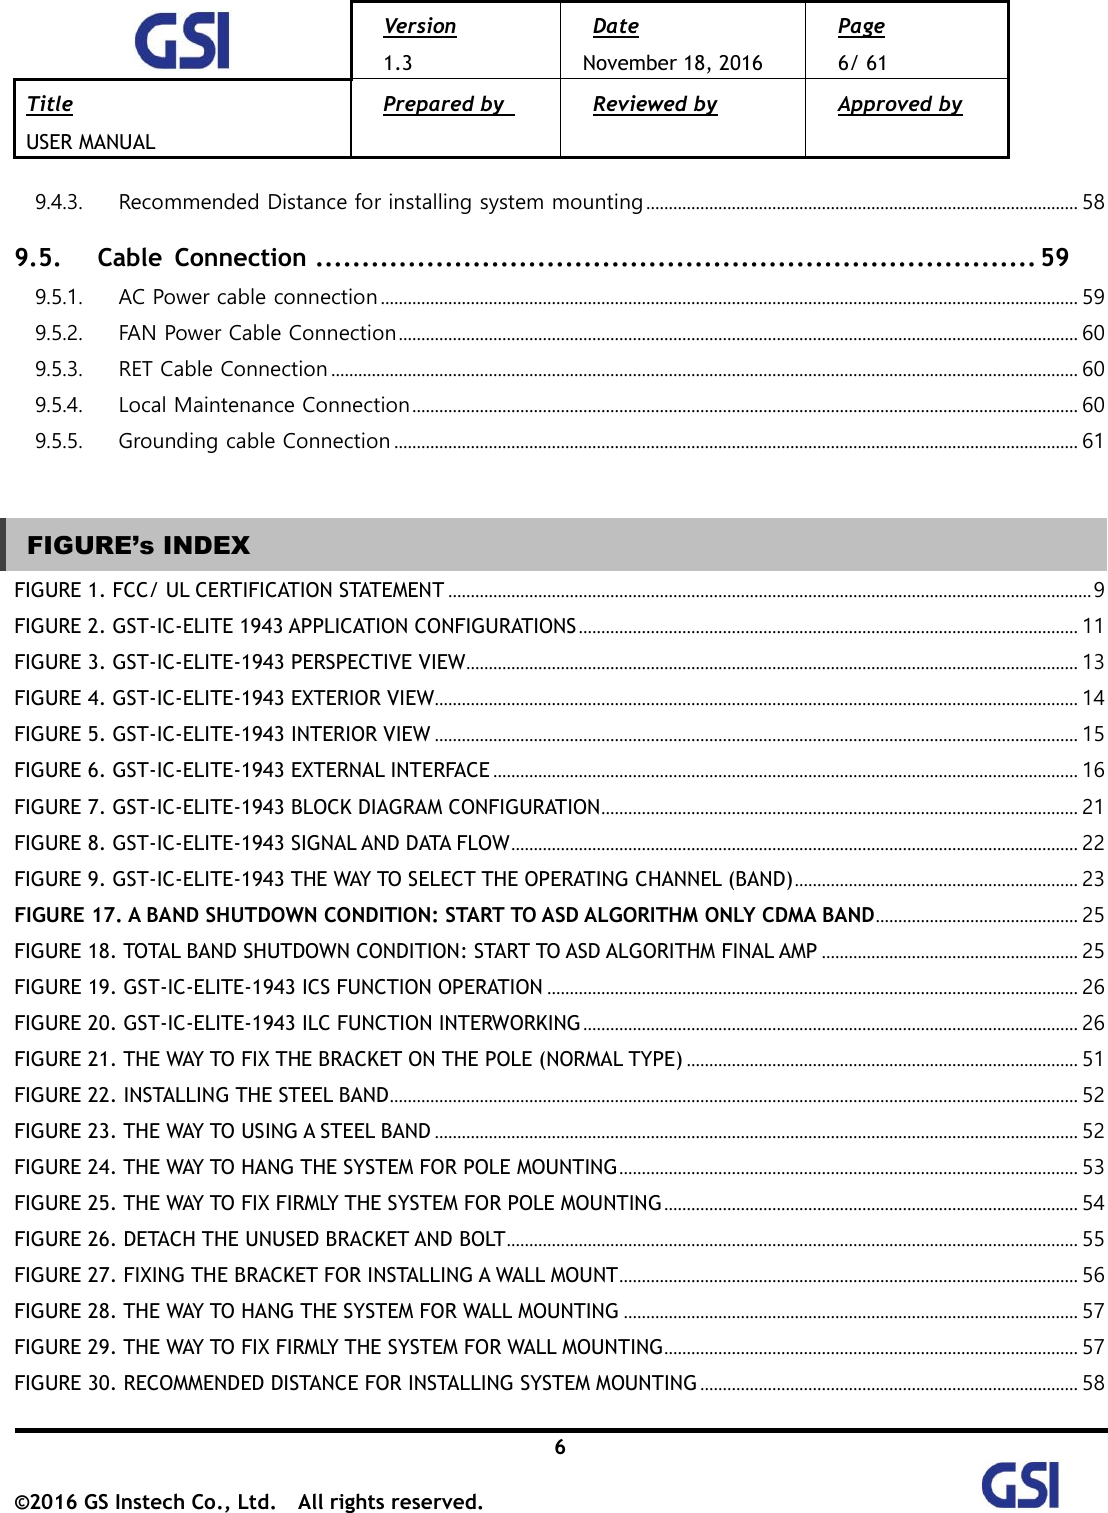  Version 1.3 Date November 18, 2016 Page 6/ 61 Title USER MANUAL Prepared by   Reviewed by  Approved by   6 ©2016 GS Instech Co., Ltd.  All rights reserved.   9.4.3.  Recommended Distance for installing system mounting ................................................................................................ 58 9.5. Cable  Connection .............................................................................. 59 9.5.1.  AC Power cable connection ........................................................................................................................................................... 59 9.5.2.  FAN Power Cable Connection ....................................................................................................................................................... 60 9.5.3.  RET Cable Connection ...................................................................................................................................................................... 60 9.5.4.  Local Maintenance Connection .................................................................................................................................................... 60 9.5.5.  Grounding cable Connection ........................................................................................................................................................ 61   FIGURE’s INDEX FIGURE 1. FCC/ UL CERTIFICATION STATEMENT ............................................................................................................................................... 9 FIGURE 2. GST-IC-ELITE 1943 APPLICATION CONFIGURATIONS ............................................................................................................... 11 FIGURE 3. GST-IC-ELITE-1943 PERSPECTIVE VIEW ........................................................................................................................................ 13 FIGURE 4. GST-IC-ELITE-1943 EXTERIOR VIEW............................................................................................................................................... 14 FIGURE 5. GST-IC-ELITE-1943 INTERIOR VIEW ............................................................................................................................................... 15 FIGURE 6. GST-IC-ELITE-1943 EXTERNAL INTERFACE .................................................................................................................................. 16 FIGURE 7. GST-IC-ELITE-1943 BLOCK DIAGRAM CONFIGURATION .......................................................................................................... 21 FIGURE 8. GST-IC-ELITE-1943 SIGNAL AND DATA FLOW .............................................................................................................................. 22 FIGURE 9. GST-IC-ELITE-1943 THE WAY TO SELECT THE OPERATING CHANNEL (BAND) ............................................................... 23 FIGURE 17. A BAND SHUTDOWN CONDITION: START TO ASD ALGORITHM ONLY CDMA BAND ............................................. 25 FIGURE 18. TOTAL BAND SHUTDOWN CONDITION: START TO ASD ALGORITHM FINAL AMP ......................................................... 25 FIGURE 19. GST-IC-ELITE-1943 ICS FUNCTION OPERATION ...................................................................................................................... 26 FIGURE 20. GST-IC-ELITE-1943 ILC FUNCTION INTERWORKING .............................................................................................................. 26 FIGURE 21. THE WAY TO FIX THE BRACKET ON THE POLE (NORMAL TYPE) ....................................................................................... 51 FIGURE 22. INSTALLING THE STEEL BAND ......................................................................................................................................................... 52 FIGURE 23. THE WAY TO USING A STEEL BAND ............................................................................................................................................... 52 FIGURE 24. THE WAY TO HANG THE SYSTEM FOR POLE MOUNTING ...................................................................................................... 53 FIGURE 25. THE WAY TO FIX FIRMLY THE SYSTEM FOR POLE MOUNTING ............................................................................................ 54 FIGURE 26. DETACH THE UNUSED BRACKET AND BOLT ............................................................................................................................... 55 FIGURE 27. FIXING THE BRACKET FOR INSTALLING A WALL MOUNT ...................................................................................................... 56 FIGURE 28. THE WAY TO HANG THE SYSTEM FOR WALL MOUNTING ..................................................................................................... 57 FIGURE 29. THE WAY TO FIX FIRMLY THE SYSTEM FOR WALL MOUNTING ............................................................................................ 57 FIGURE 30. RECOMMENDED DISTANCE FOR INSTALLING SYSTEM MOUNTING .................................................................................... 58  